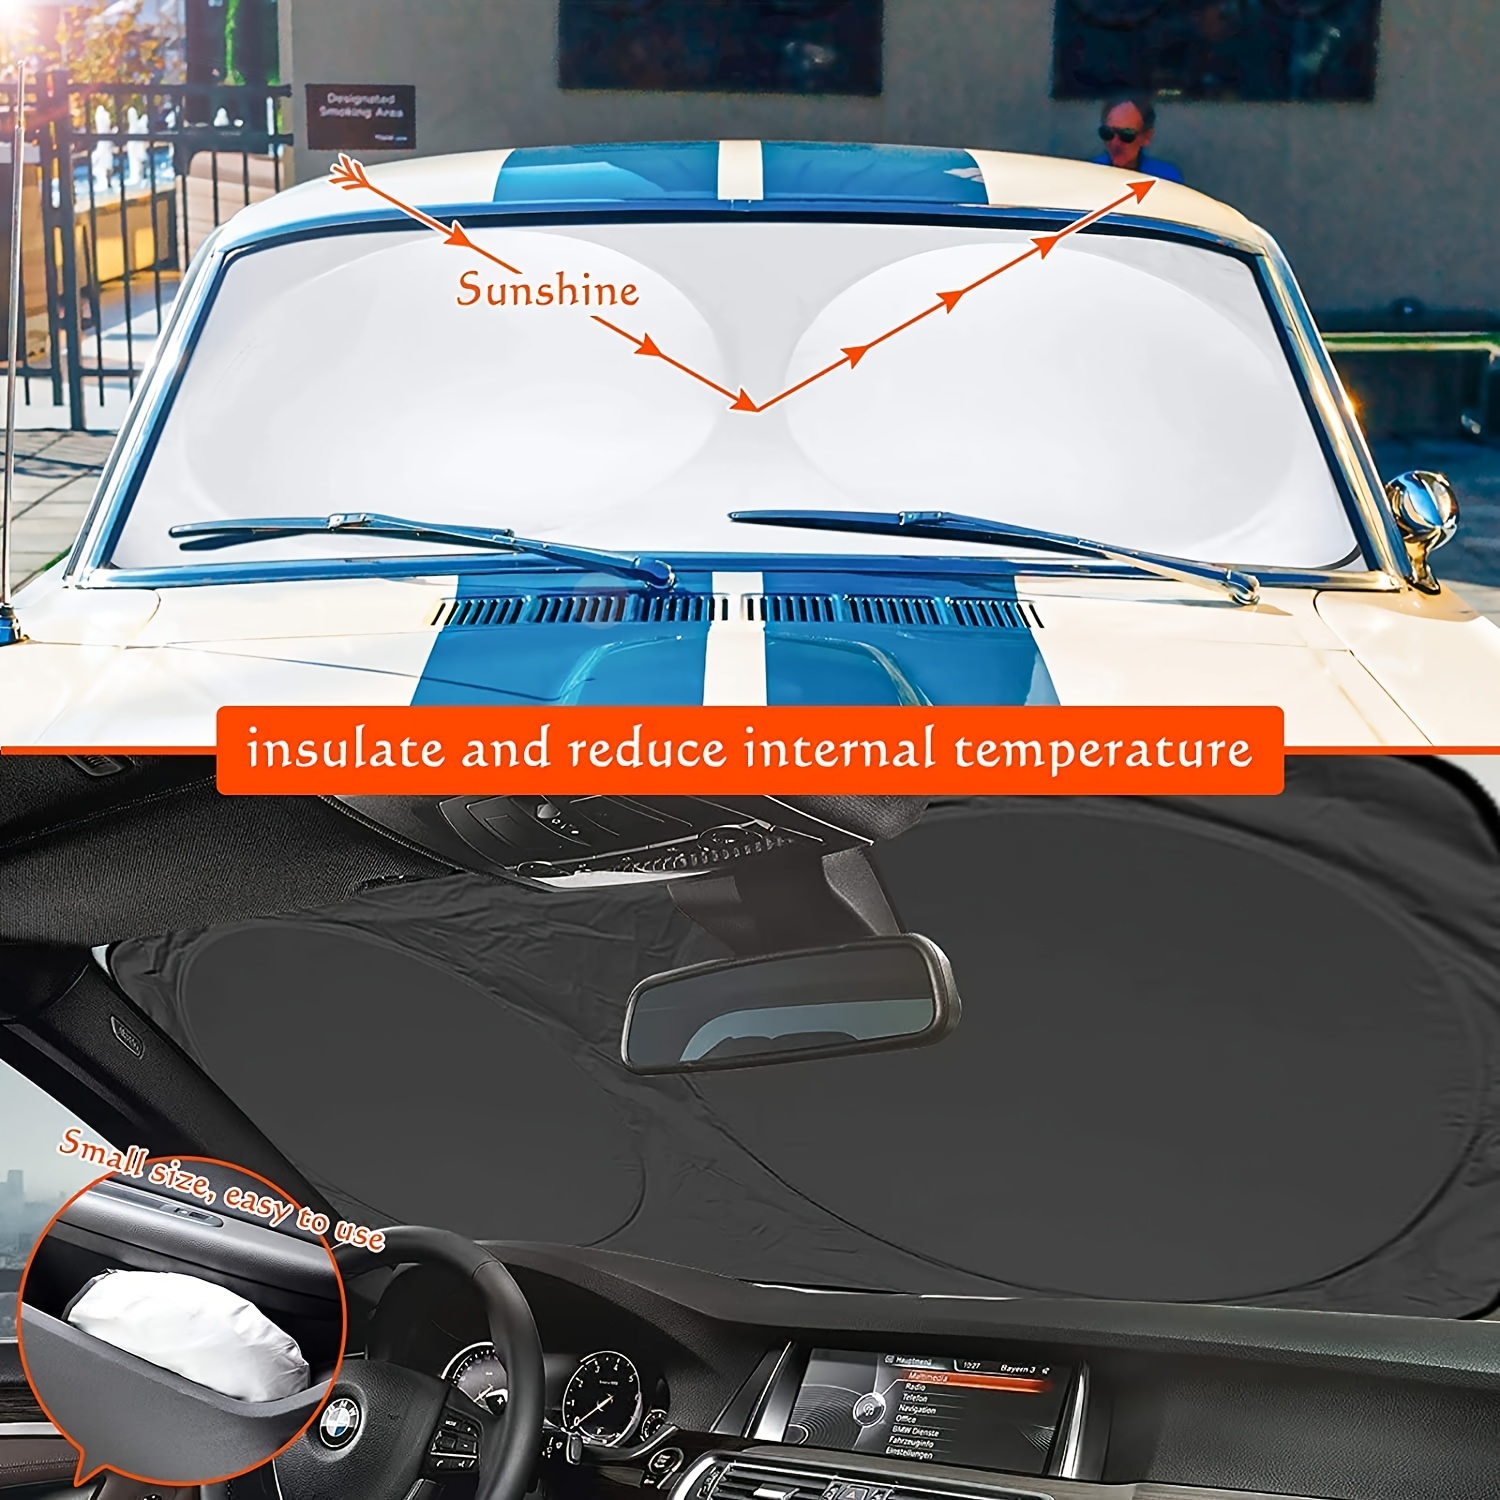 Protect Your Car From The Sun's Rays With This Automotive Windshield  Sunshade - Fits SUVs, Minivans, And Trucks!